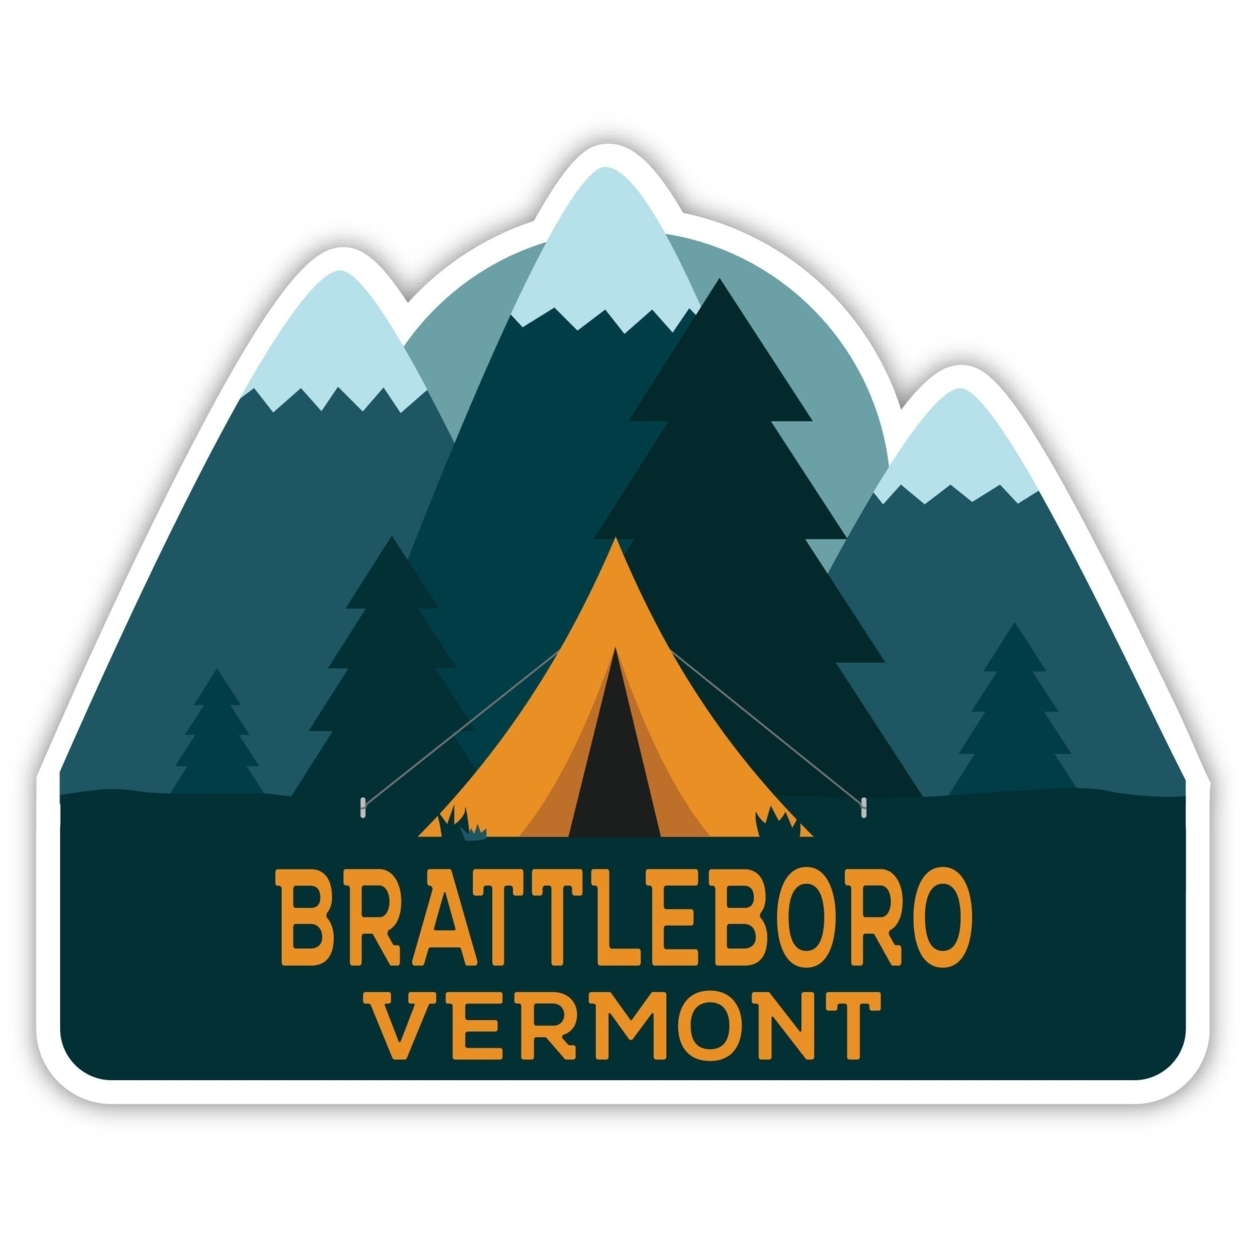 Brattleboro Vermont Souvenir Decorative Stickers (Choose Theme And Size) - 4-Pack, 6-Inch, Great Outdoors